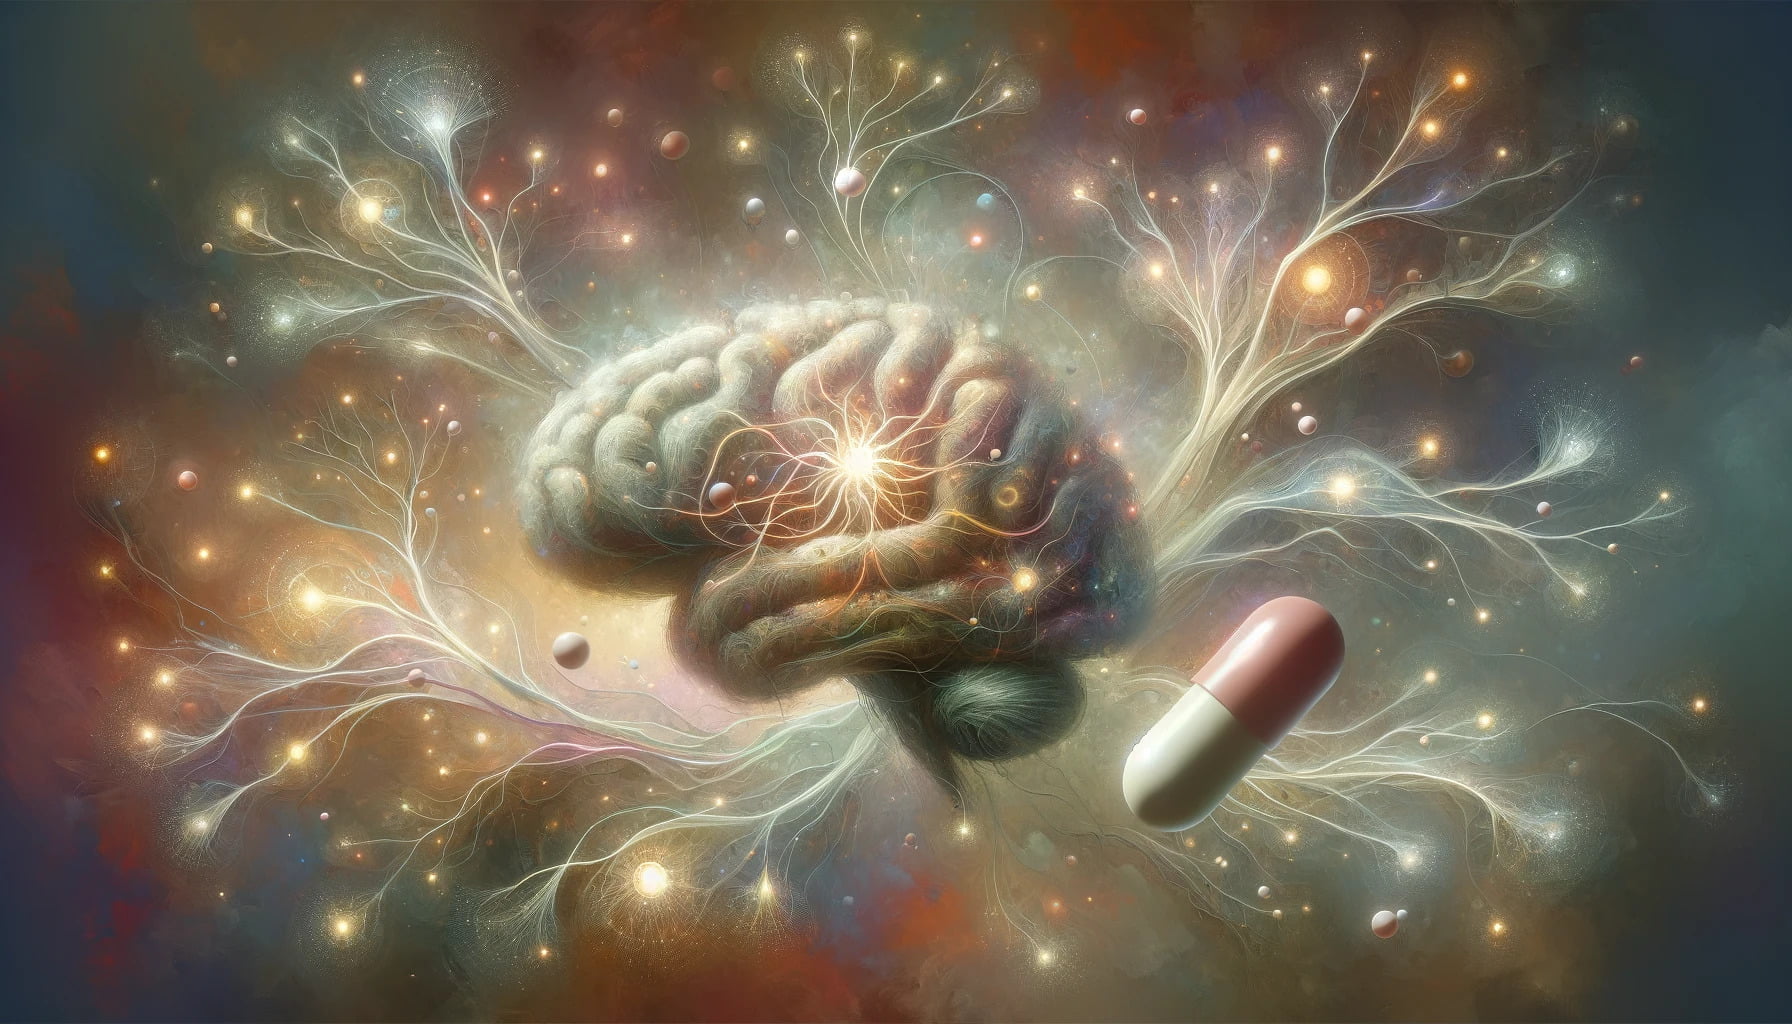 An artistic interpretation of neural connections in the brain being enhanced by a nootropic compound from Vitamin B1.